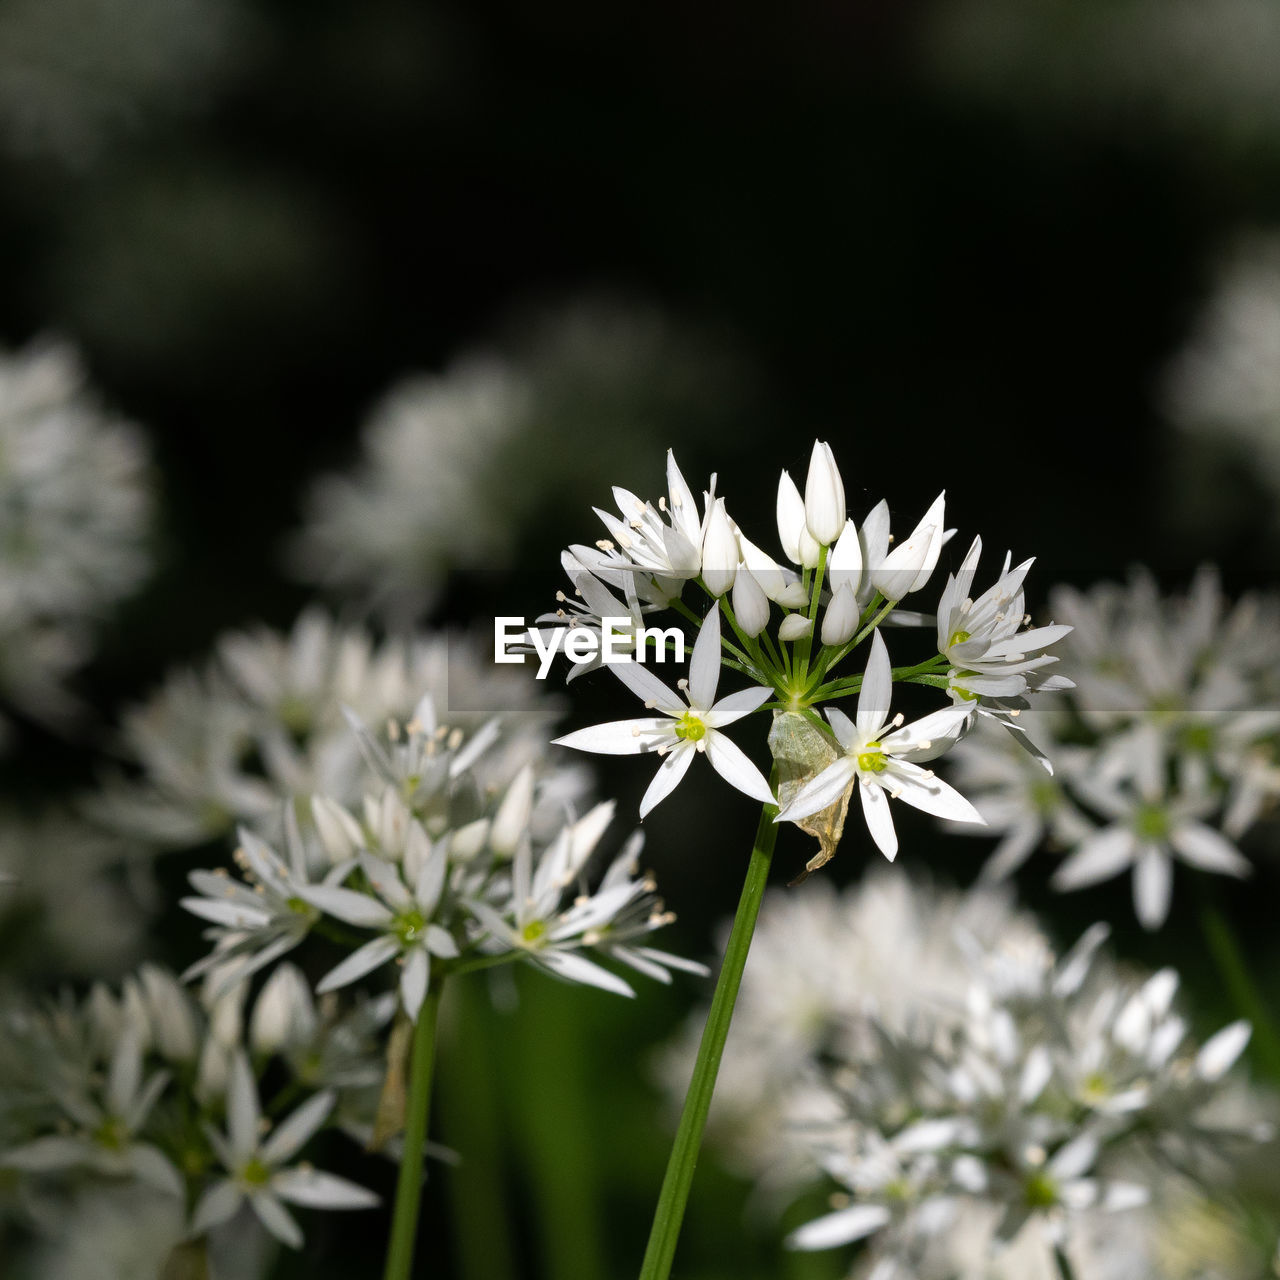 flower, plant, flowering plant, freshness, beauty in nature, nature, white, close-up, fragility, no people, flower head, blossom, macro photography, growth, focus on foreground, inflorescence, springtime, botany, outdoors, selective focus, wildflower, petal, day, food and drink